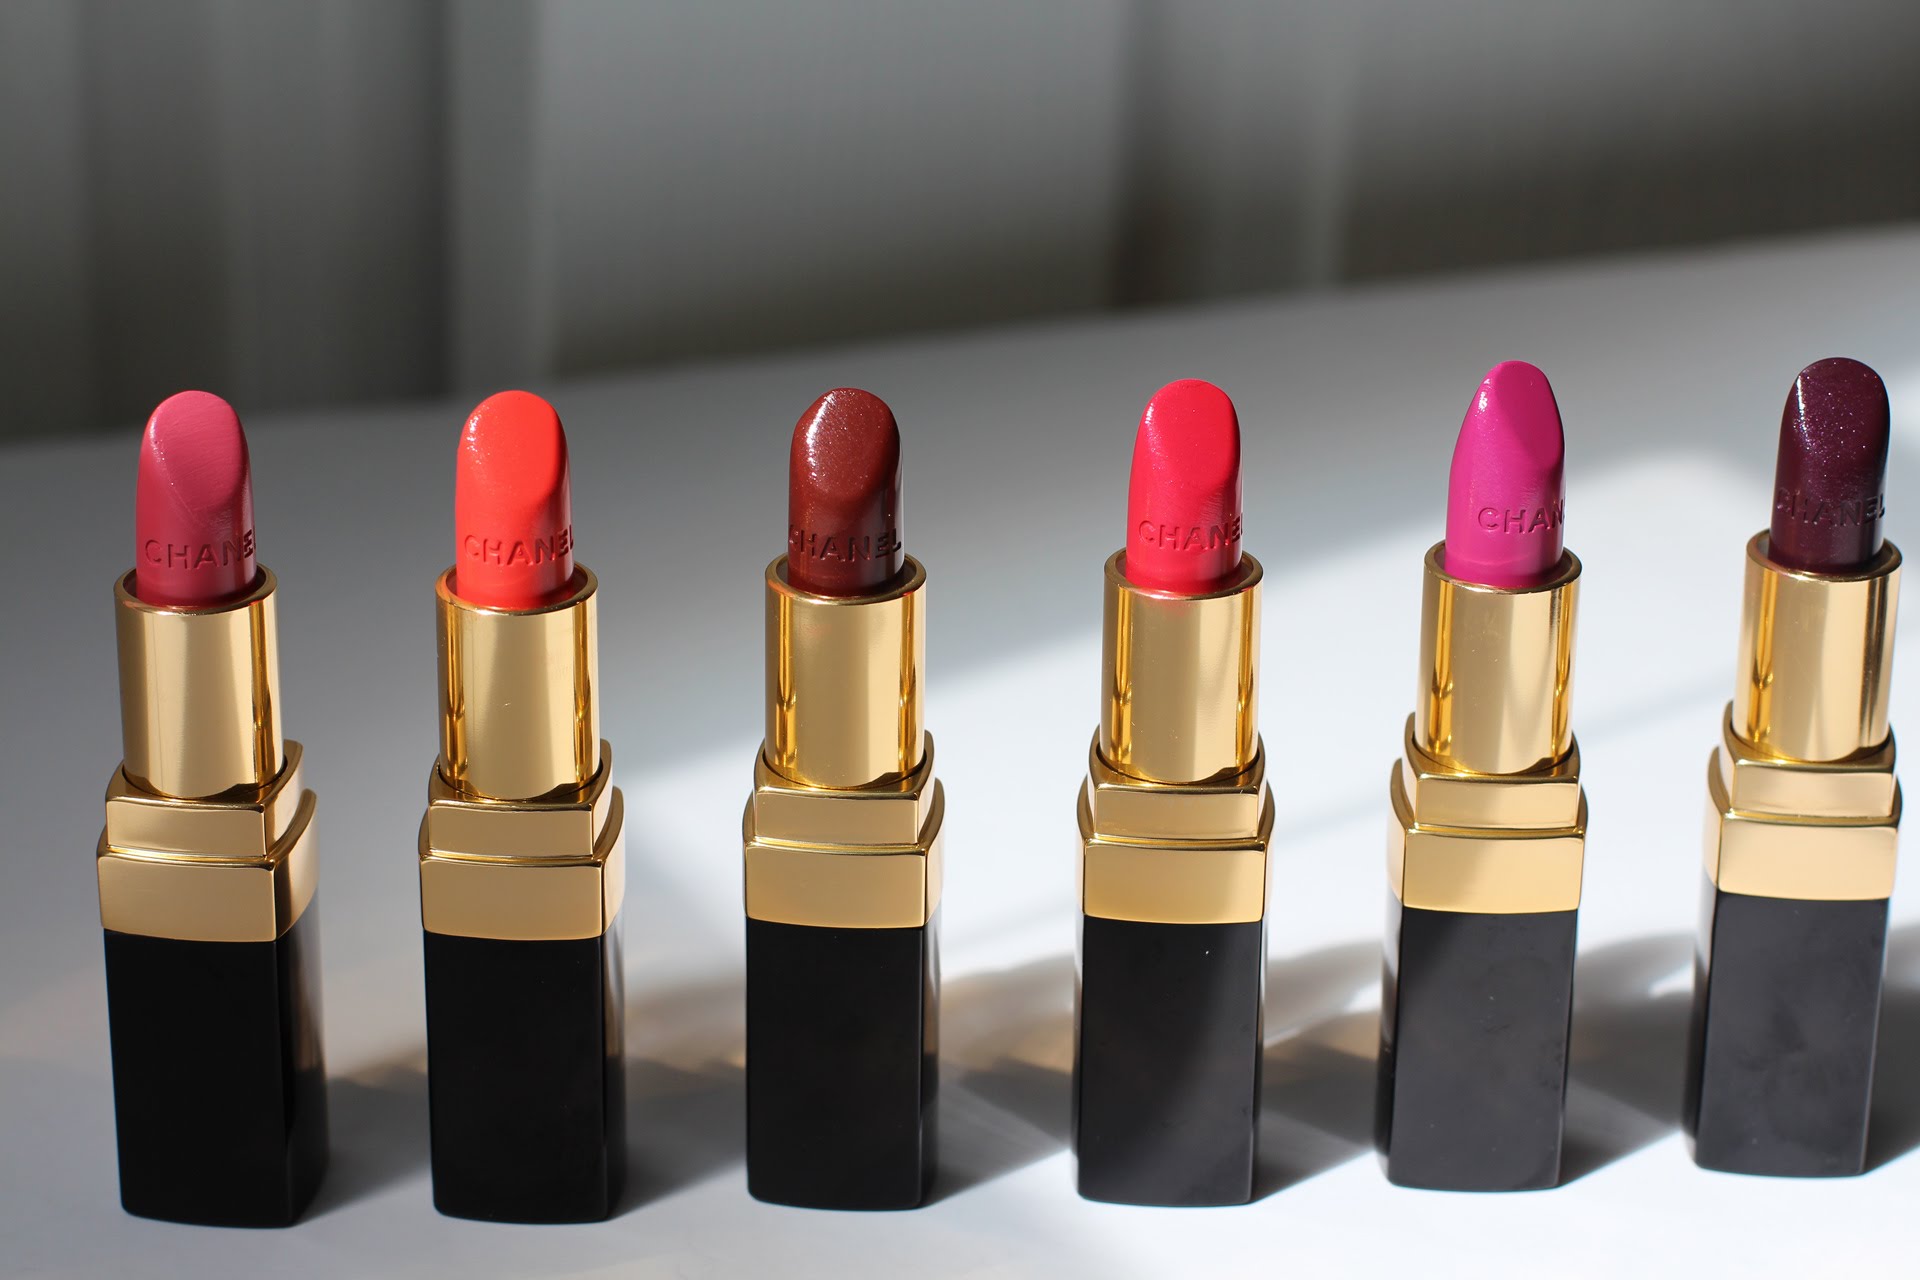 chanel-top-10-lipstick-brands-of-all-time